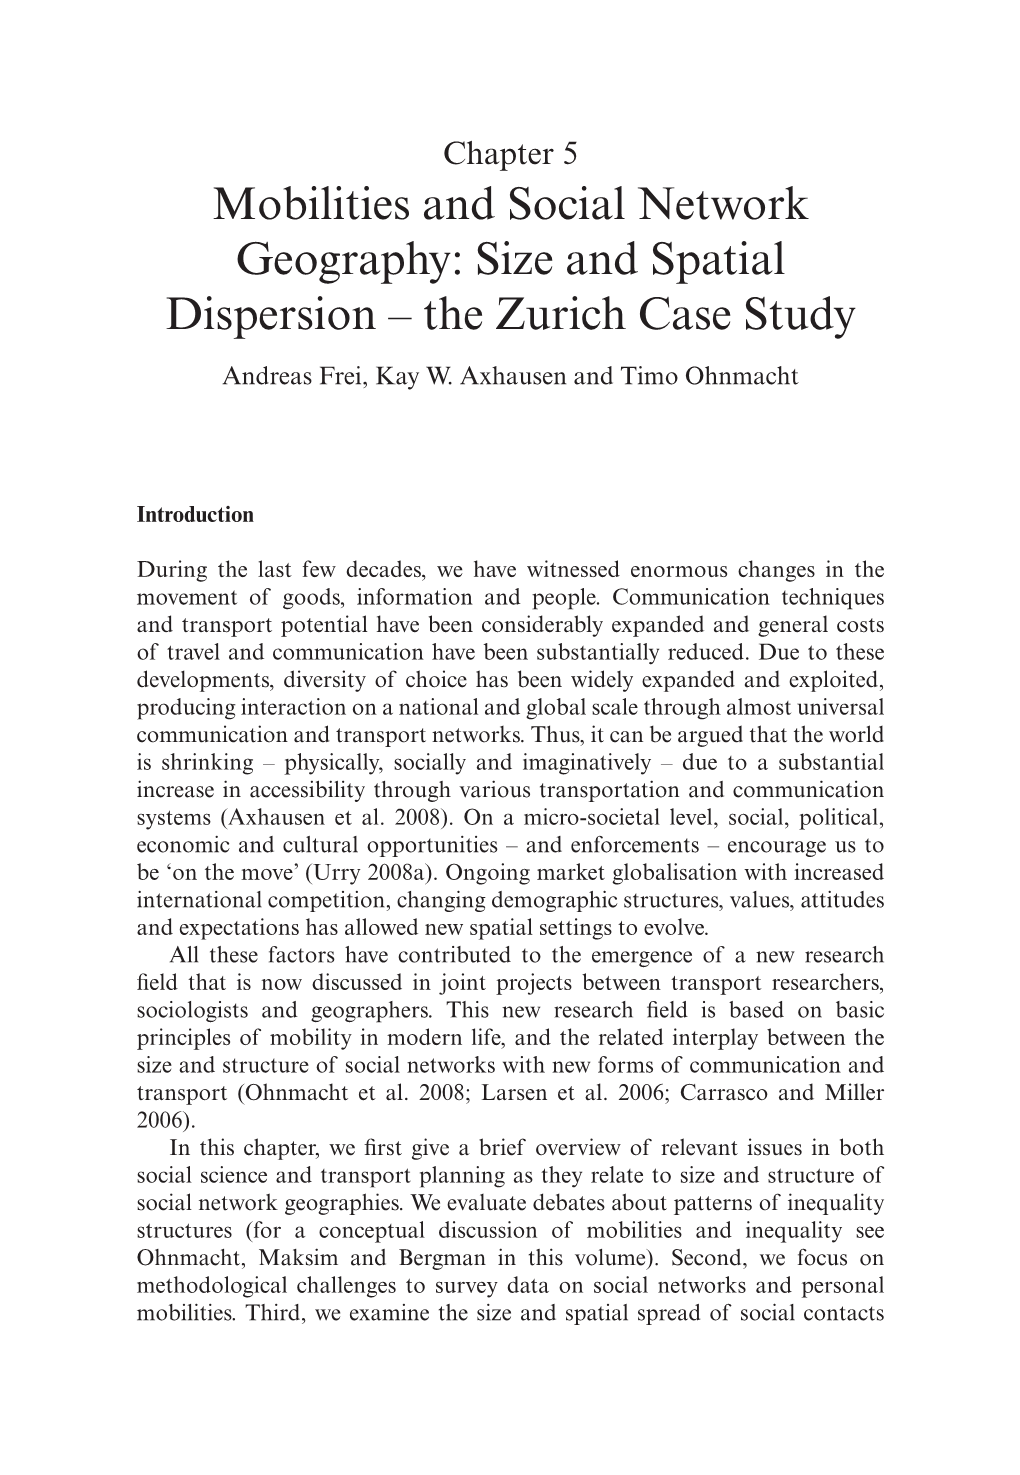 Mobilities and Social Network Geography: Size and Spatial Dispersion – the Zurich Case Study Andreas Frei, Kay W